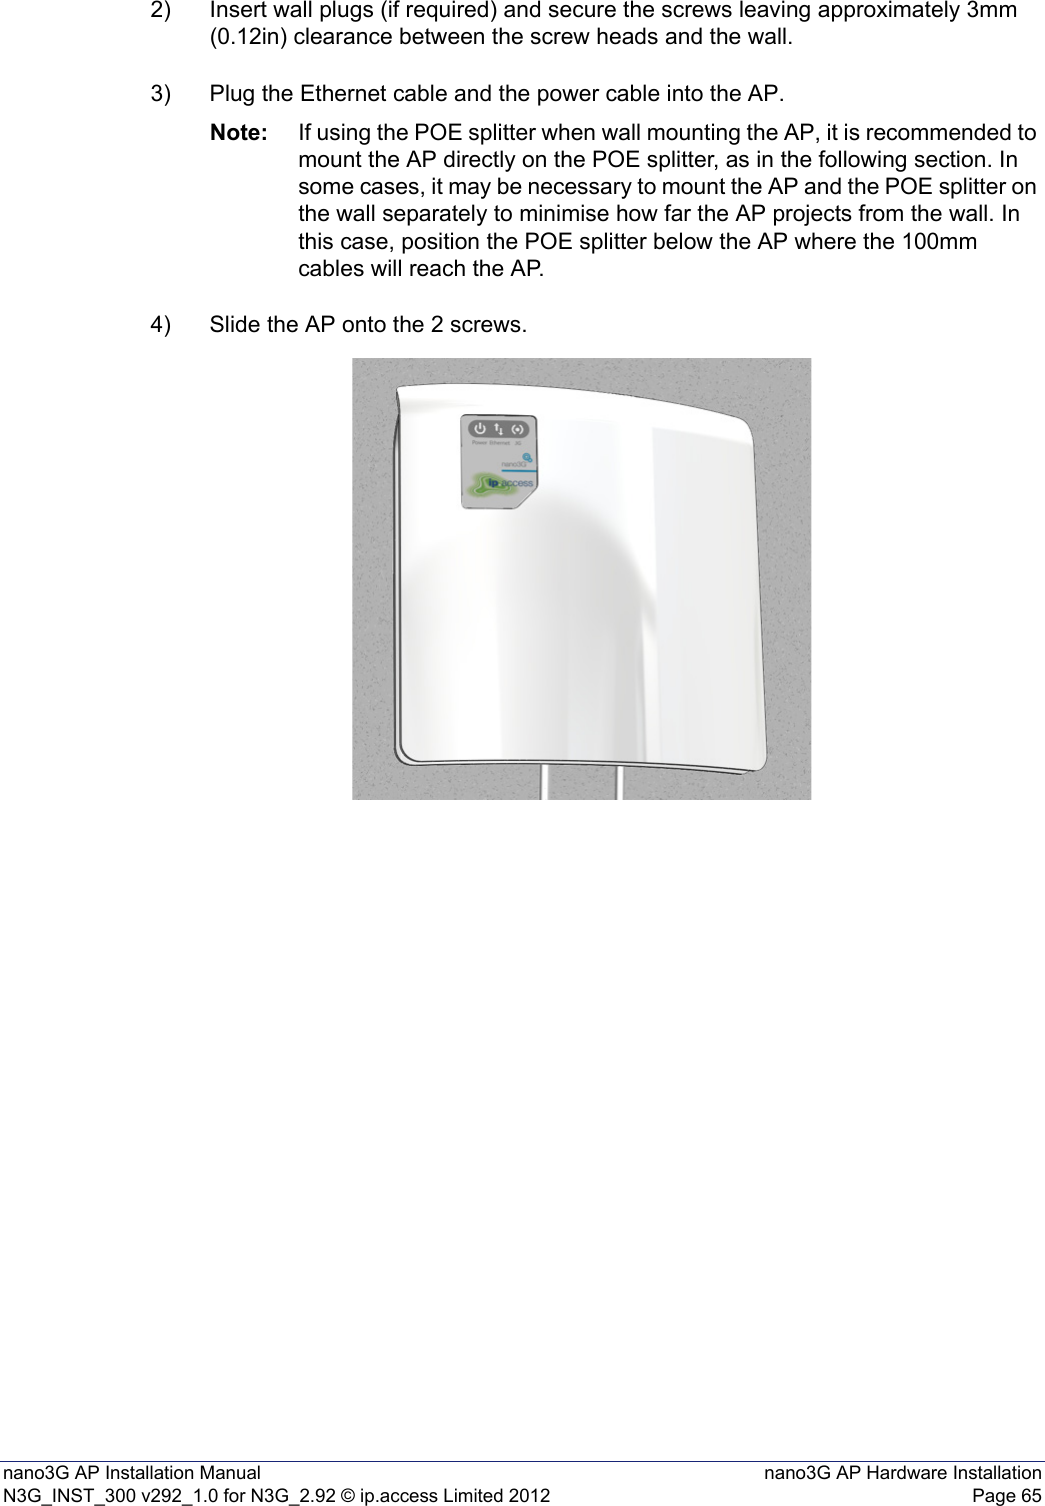 nano3G AP Installation Manual nano3G AP Hardware InstallationN3G_INST_300 v292_1.0 for N3G_2.92 © ip.access Limited 2012 Page 652) Insert wall plugs (if required) and secure the screws leaving approximately 3mm (0.12in) clearance between the screw heads and the wall.3) Plug the Ethernet cable and the power cable into the AP.Note: If using the POE splitter when wall mounting the AP, it is recommended to mount the AP directly on the POE splitter, as in the following section. In some cases, it may be necessary to mount the AP and the POE splitter on the wall separately to minimise how far the AP projects from the wall. In this case, position the POE splitter below the AP where the 100mm cables will reach the AP. 4) Slide the AP onto the 2 screws.